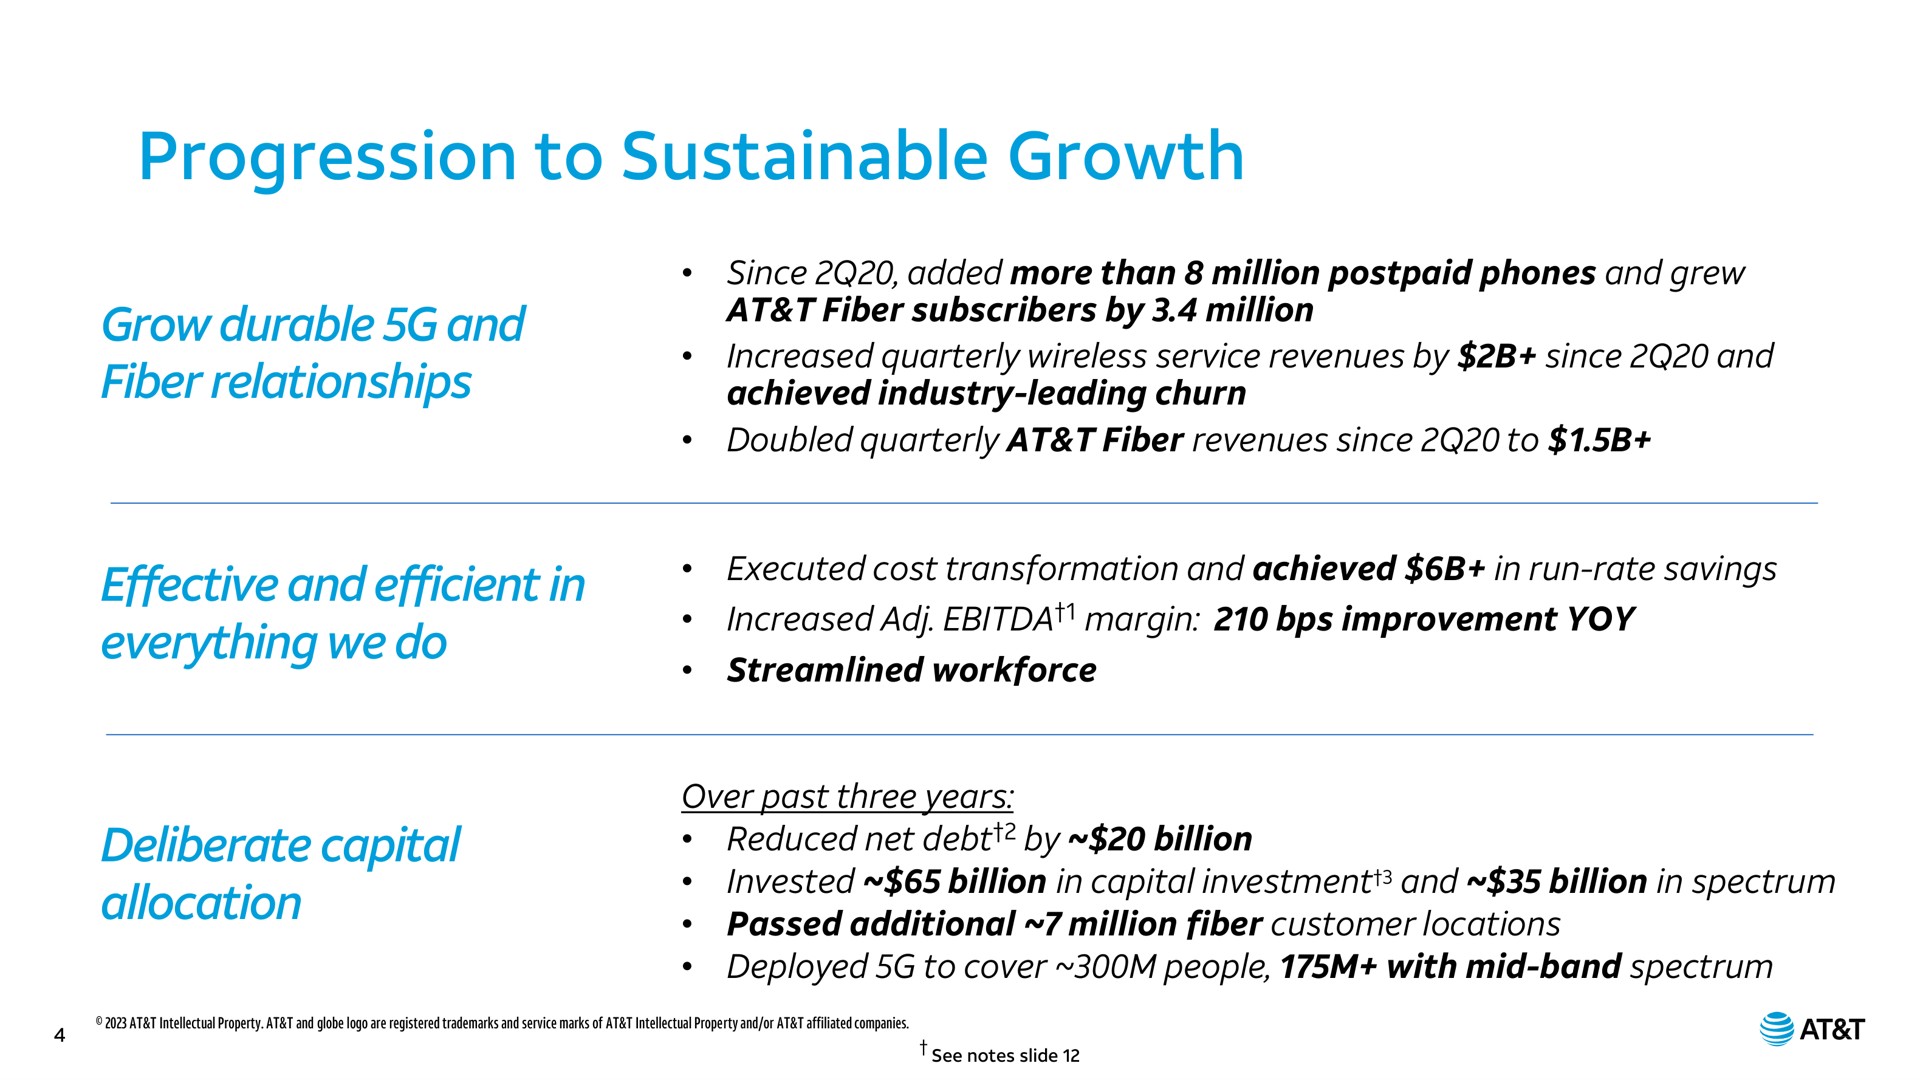 progression to sustainable growth grow durable and fiber relationships effective and efficient in everything we do deliberate capital allocation since added more than million postpaid phones grew at subscribers by million increased quarterly wireless service revenues by since achieved industry leading churn doubled quarterly at revenues since executed cost transformation achieved run rate savings increased margin improvement yoy streamlined reduced net by billion invested billion investment billion spectrum passed additional million customer locations deployed cover people with mid band spectrum | AT&T